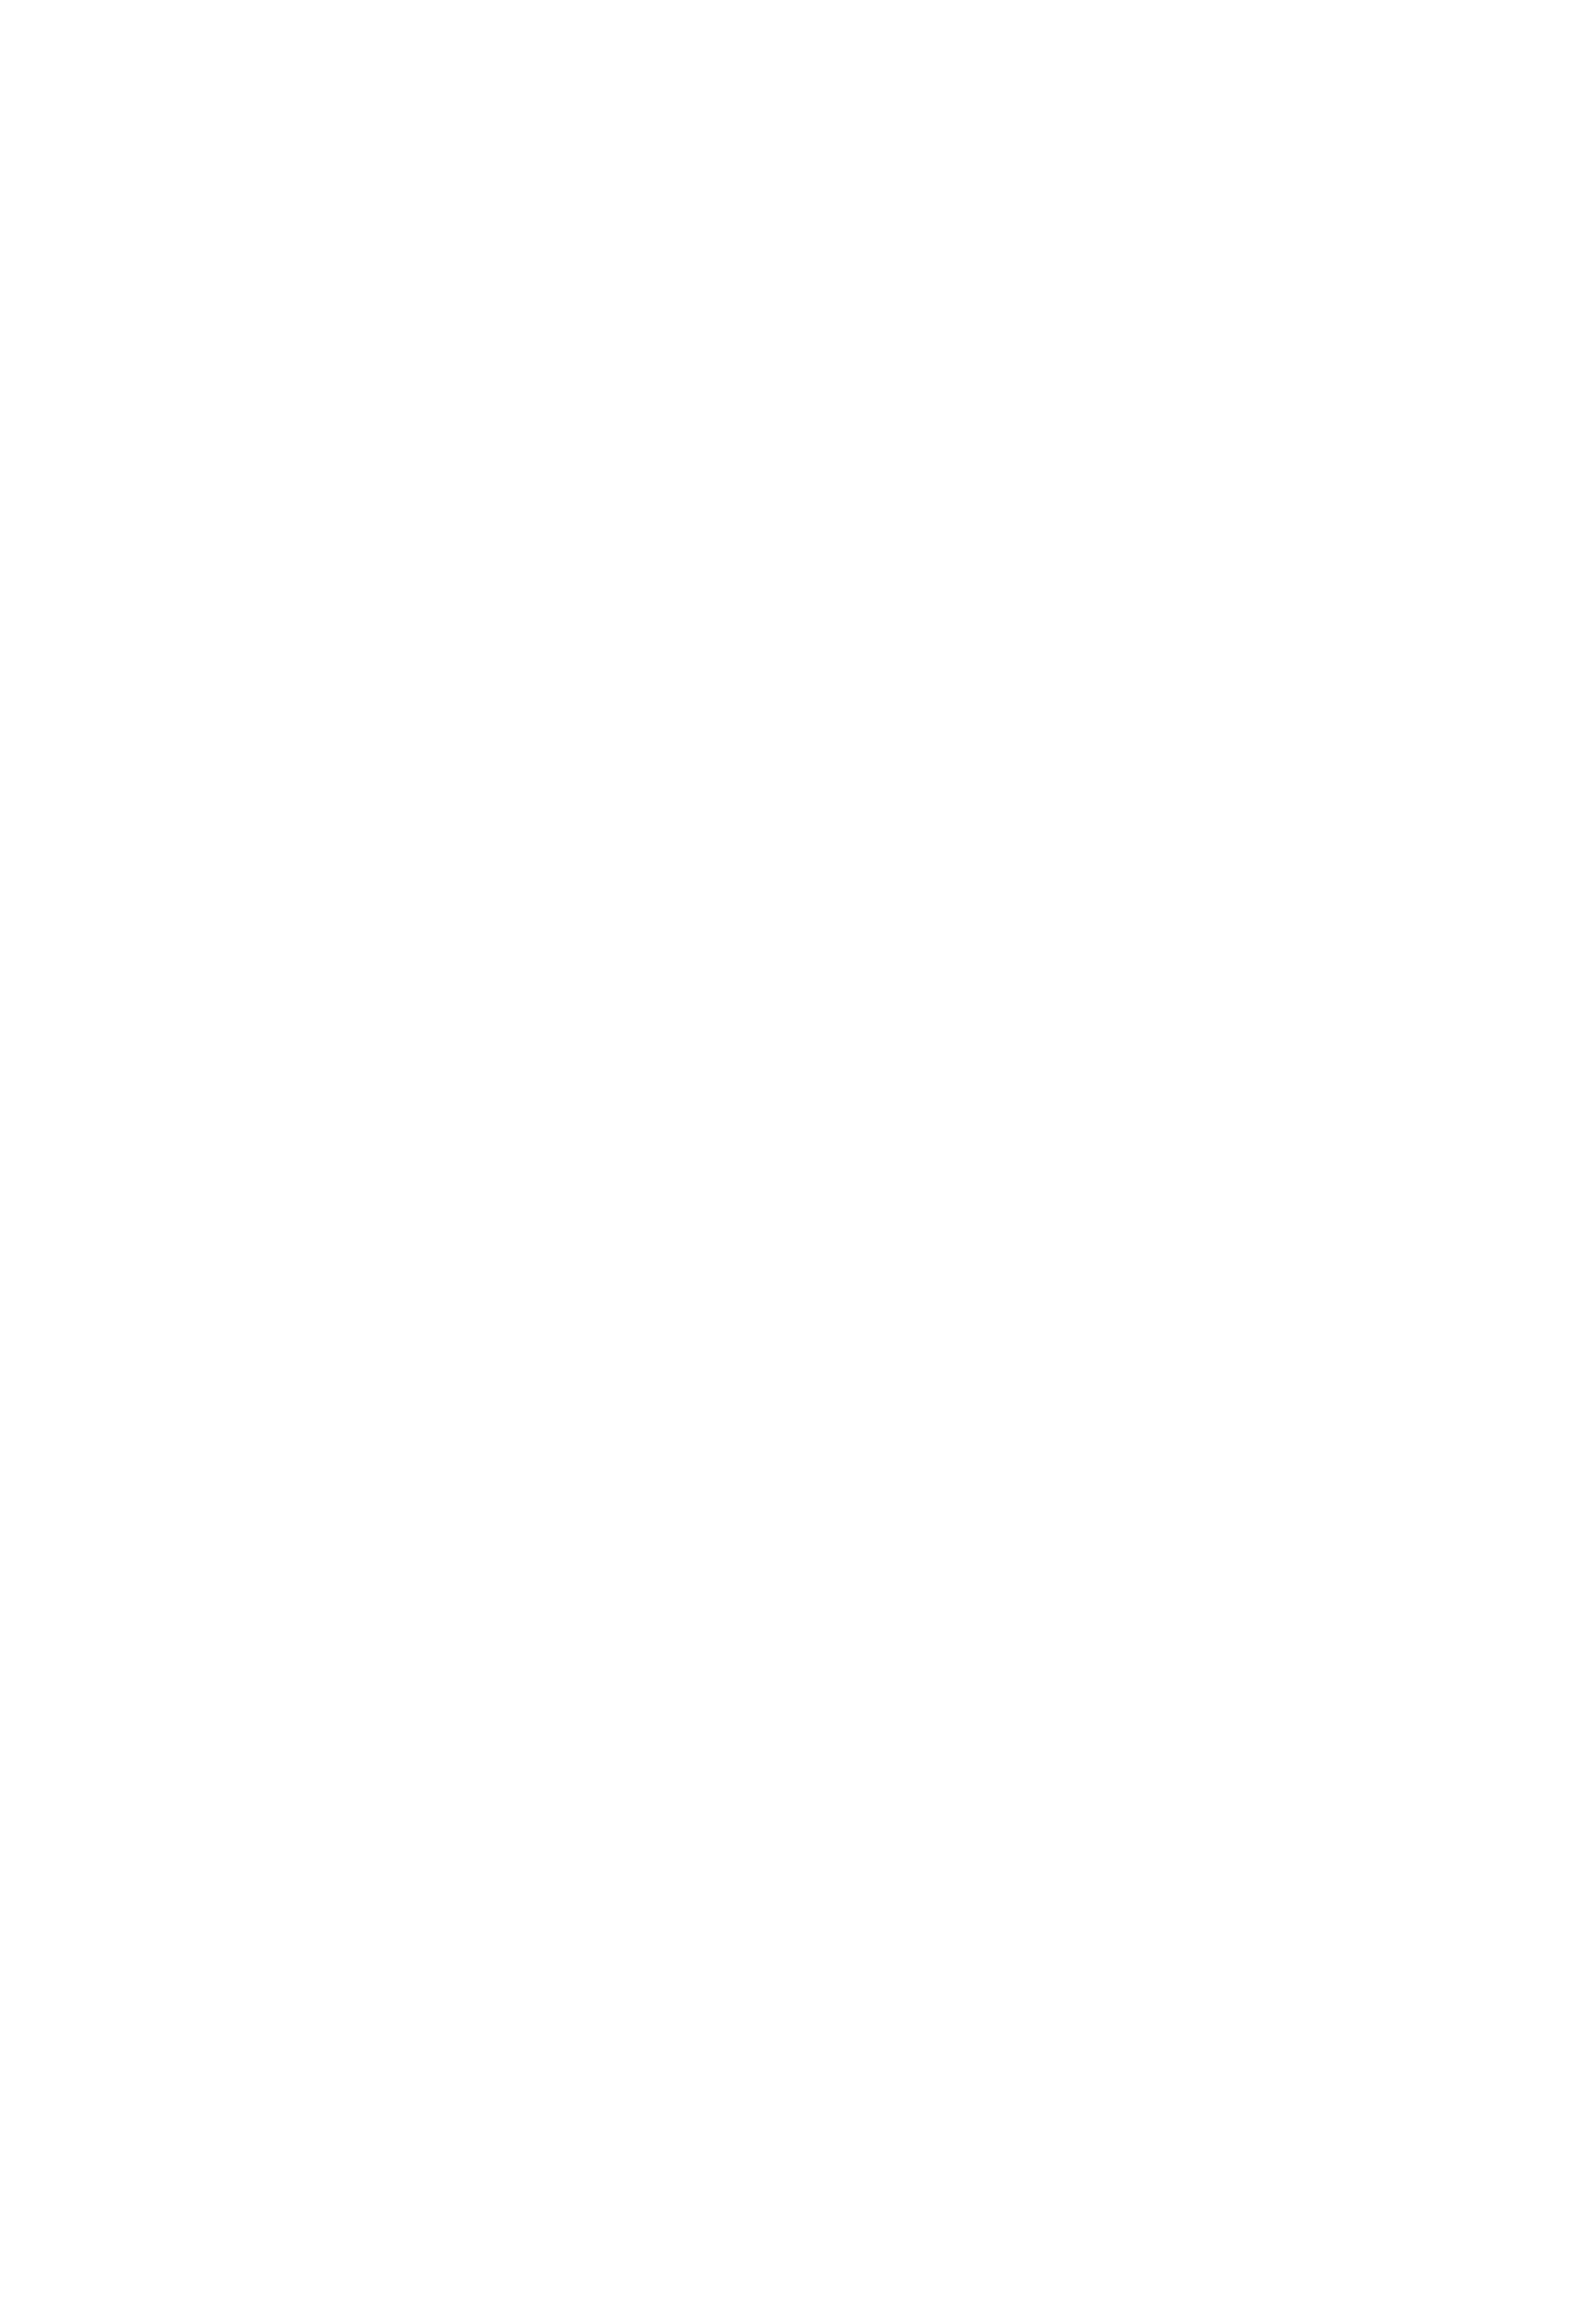 Pro tip: pop your favorite bar in the freezer for a cooled-down level-up.